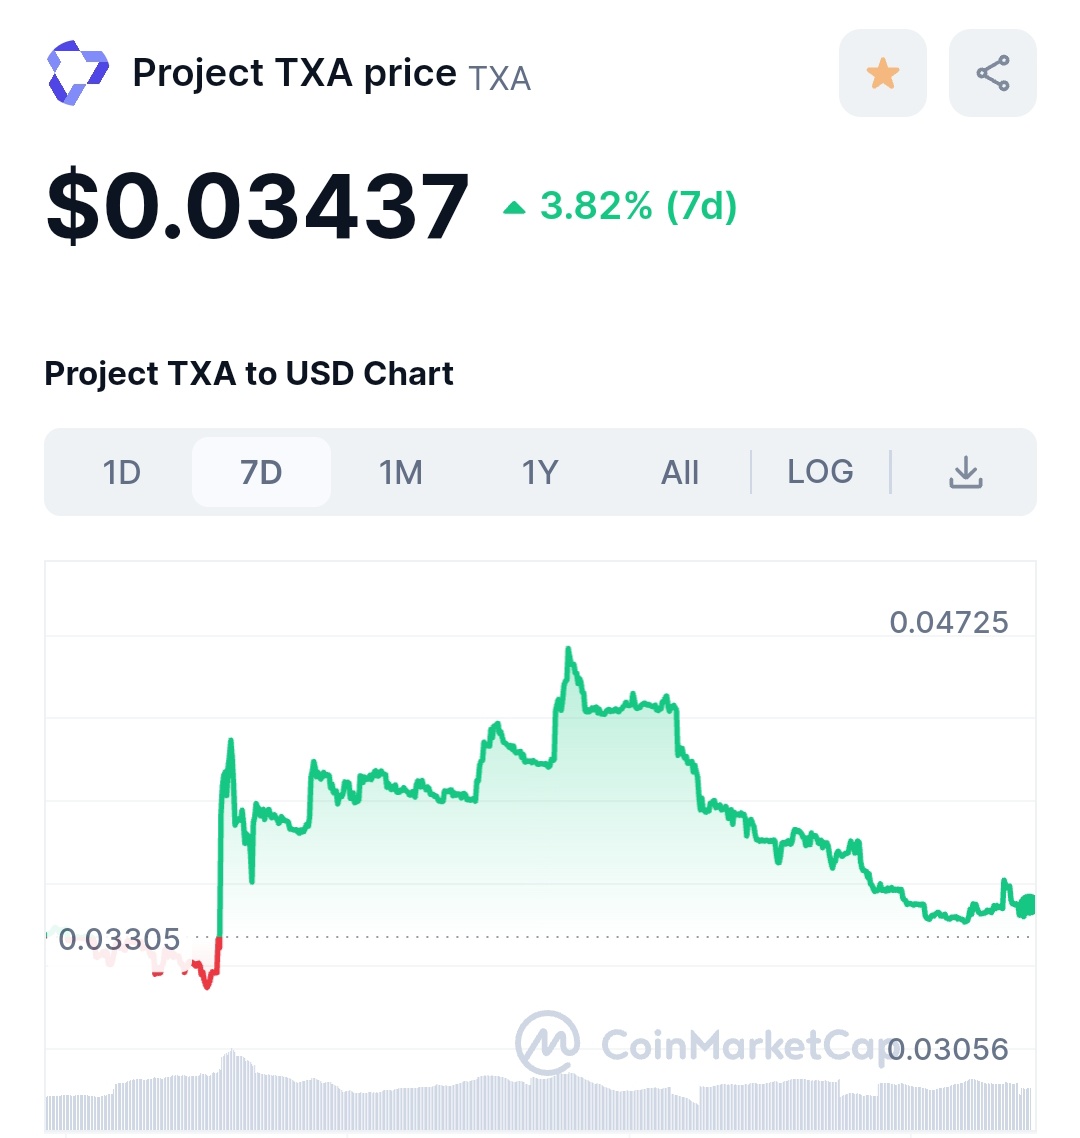 Guess what?

I bought more $TXA 

@Project_TXA is cooking...

Fade at your own RISK 🫵